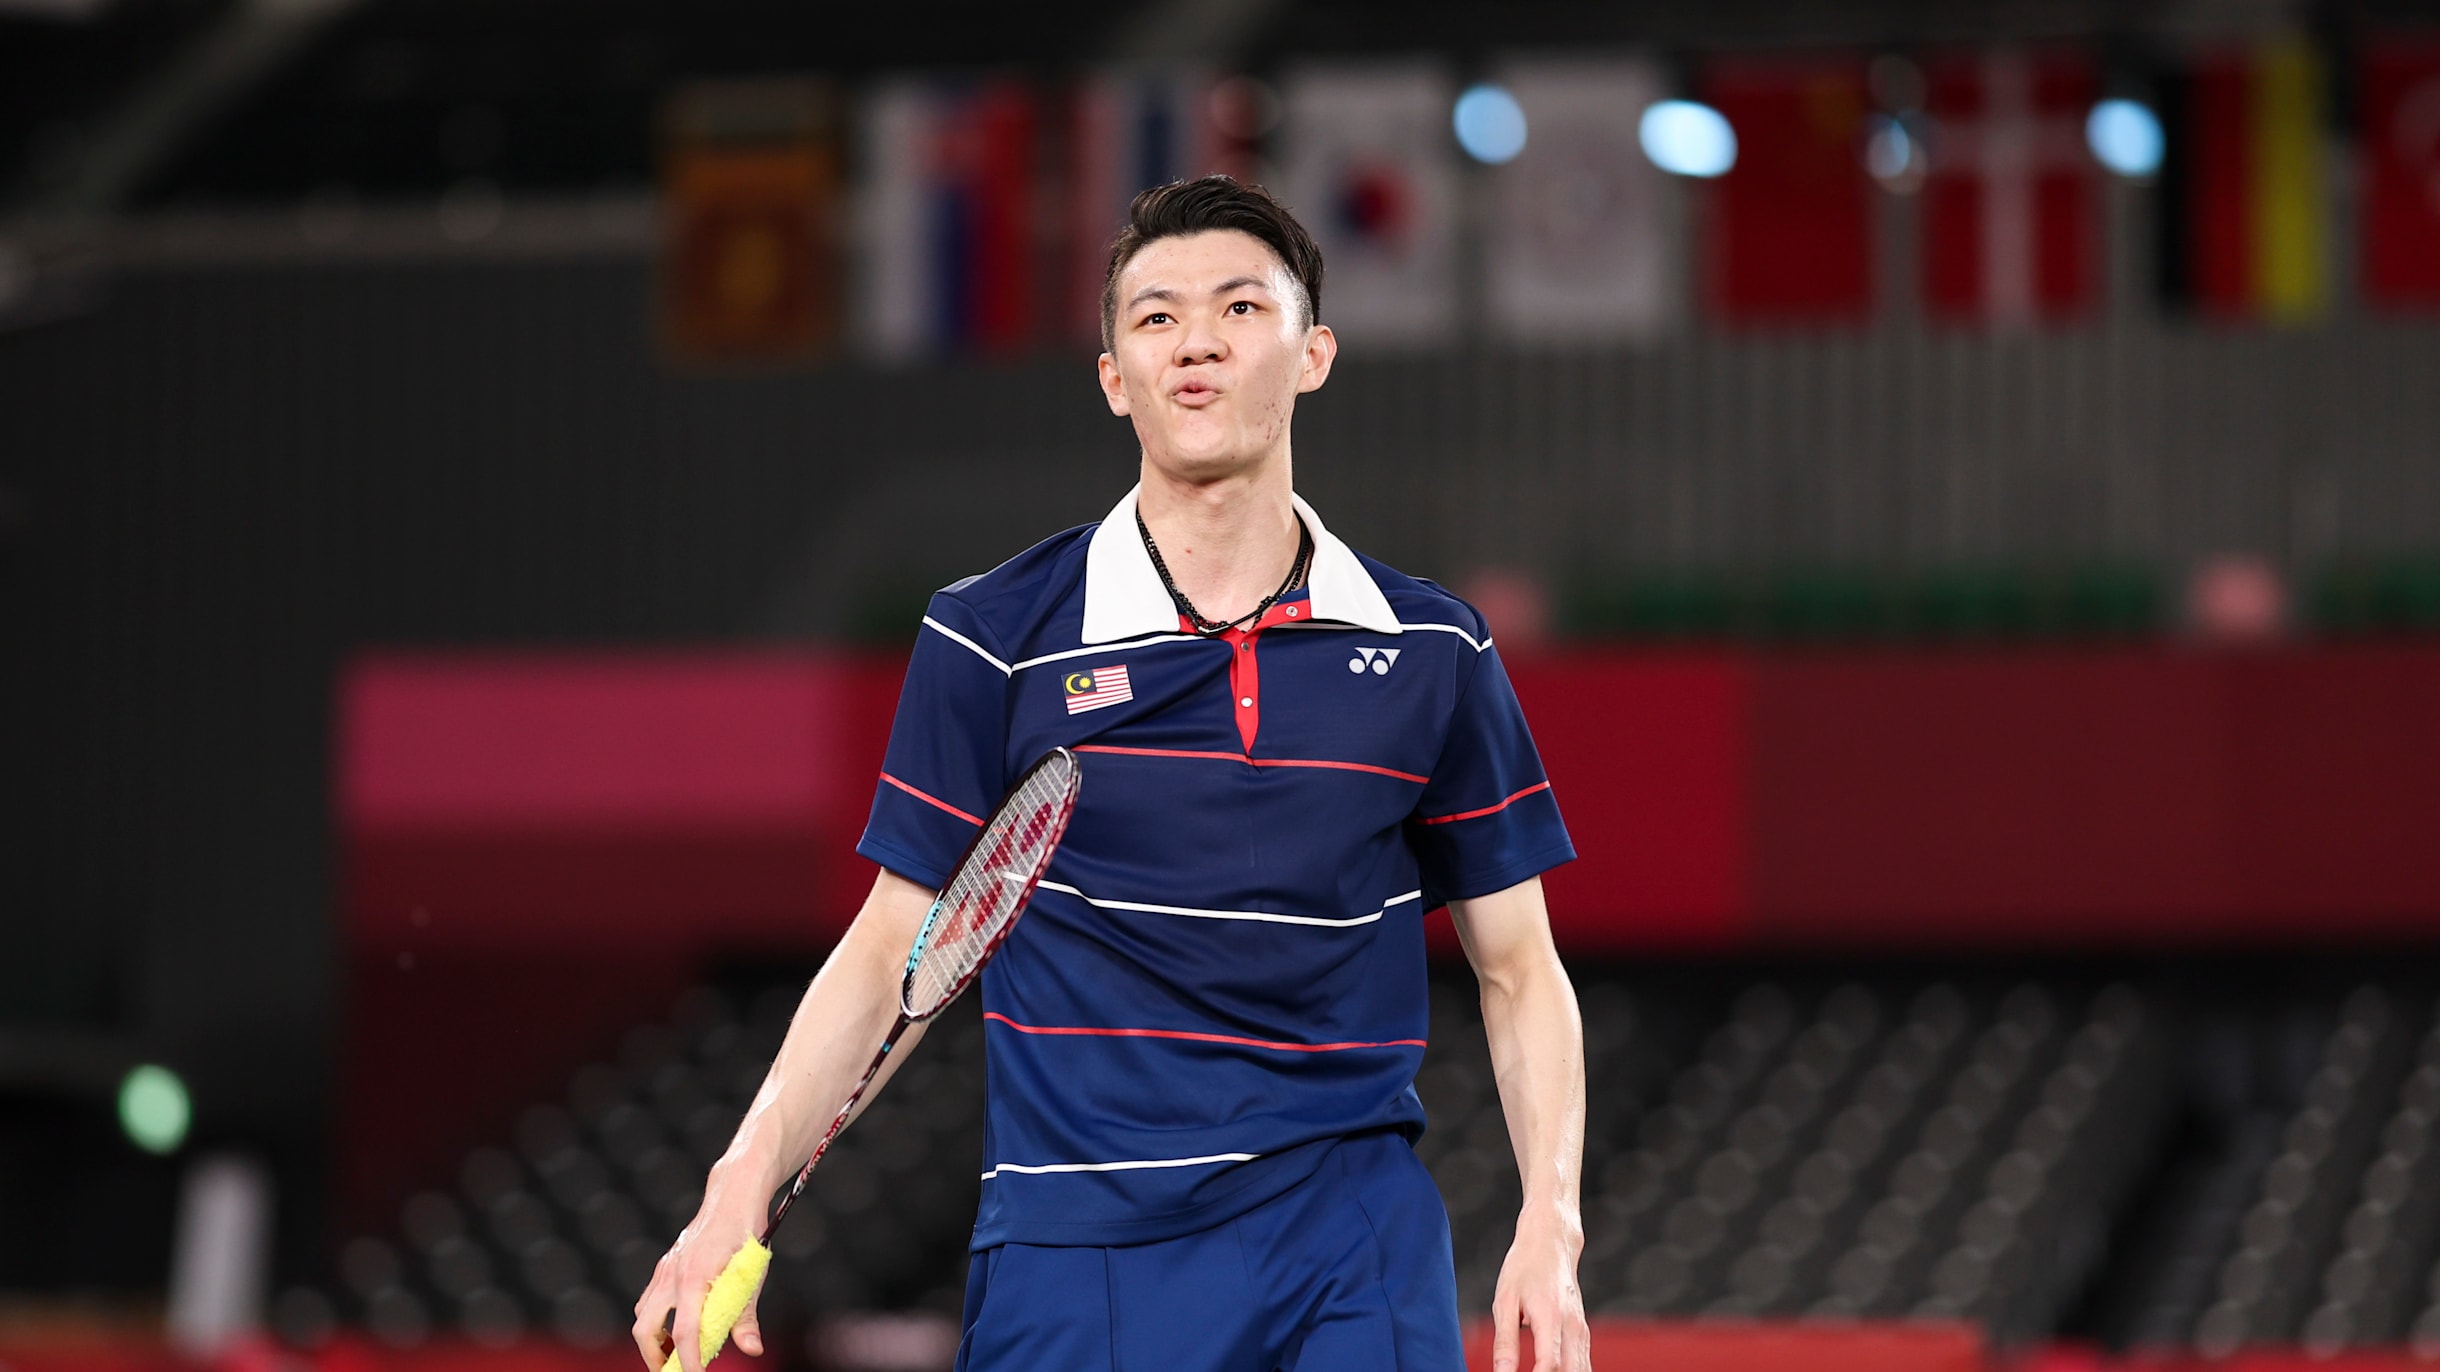 Badminton, Australian Open Lee Zii Jia to miss World Tour Finals after second round exit